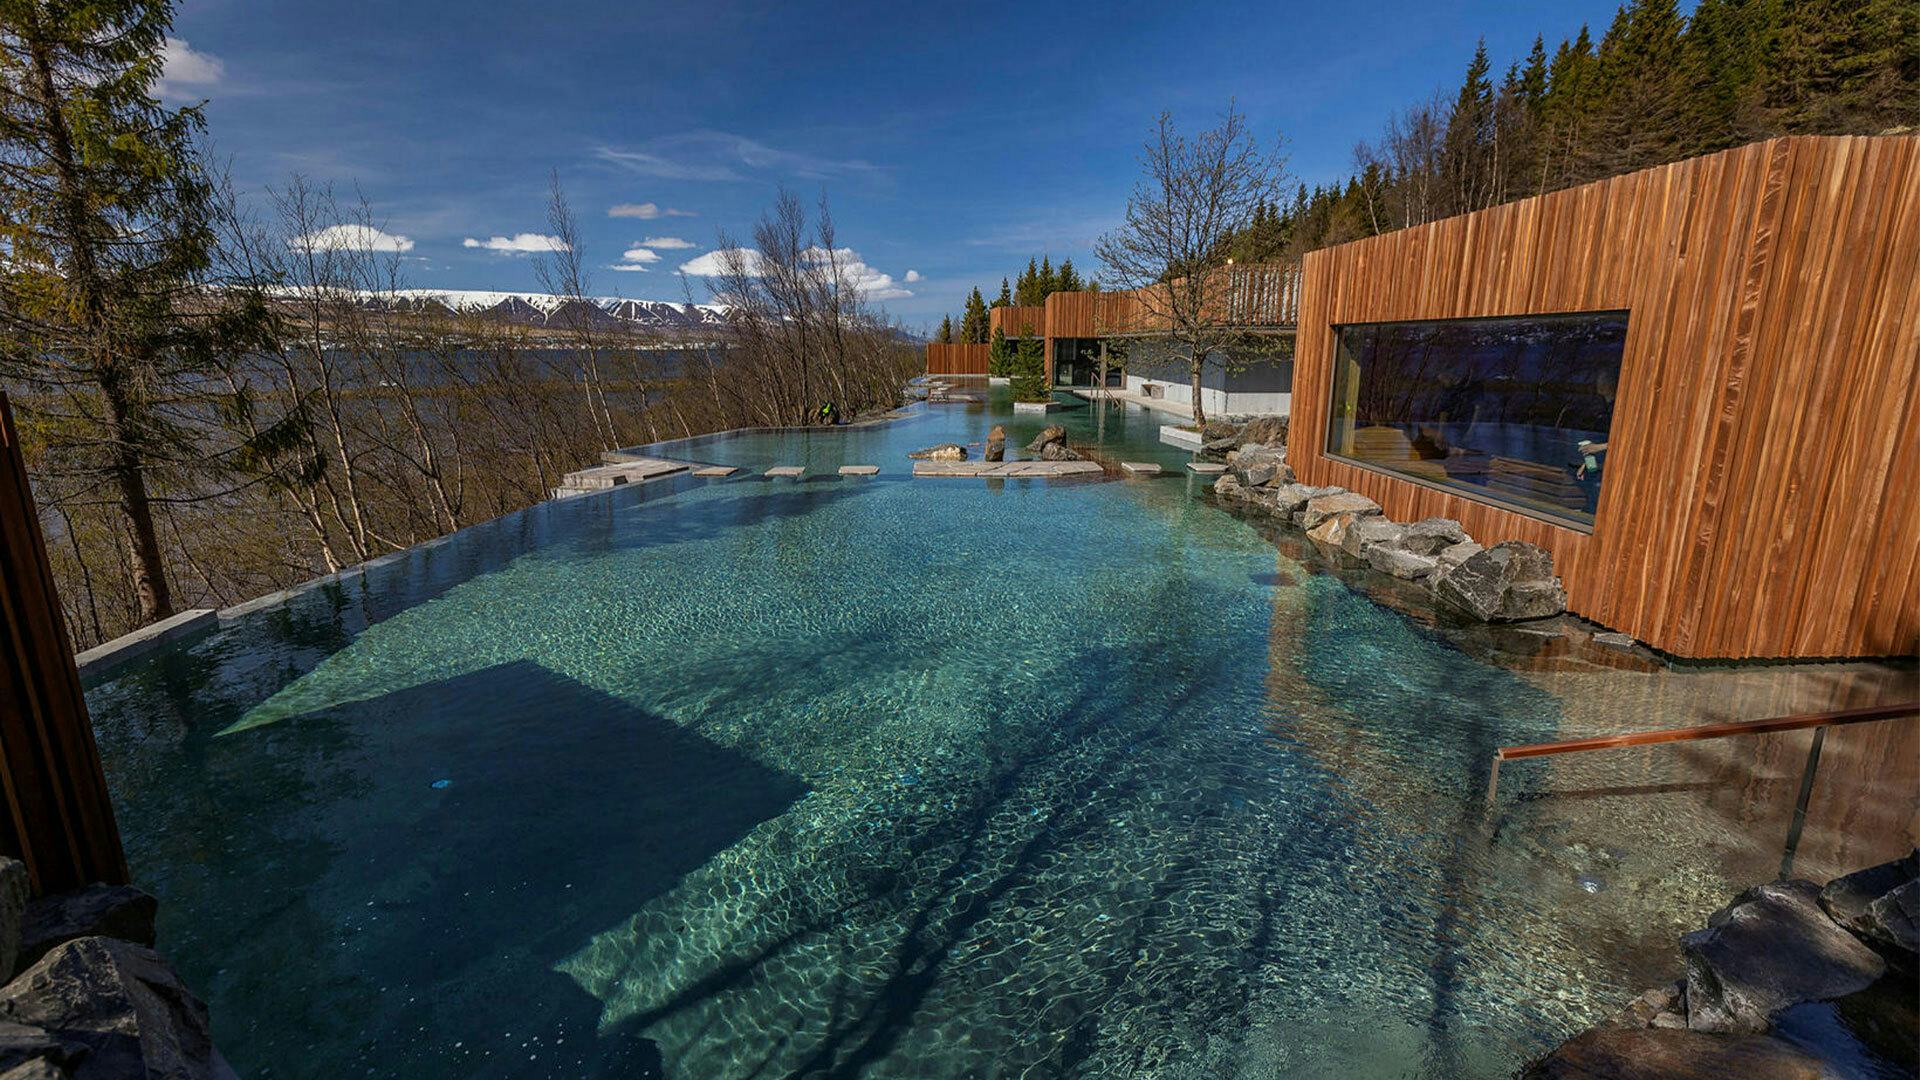 Geothermal spa surrounded by pine trees, overlooking fjords. 